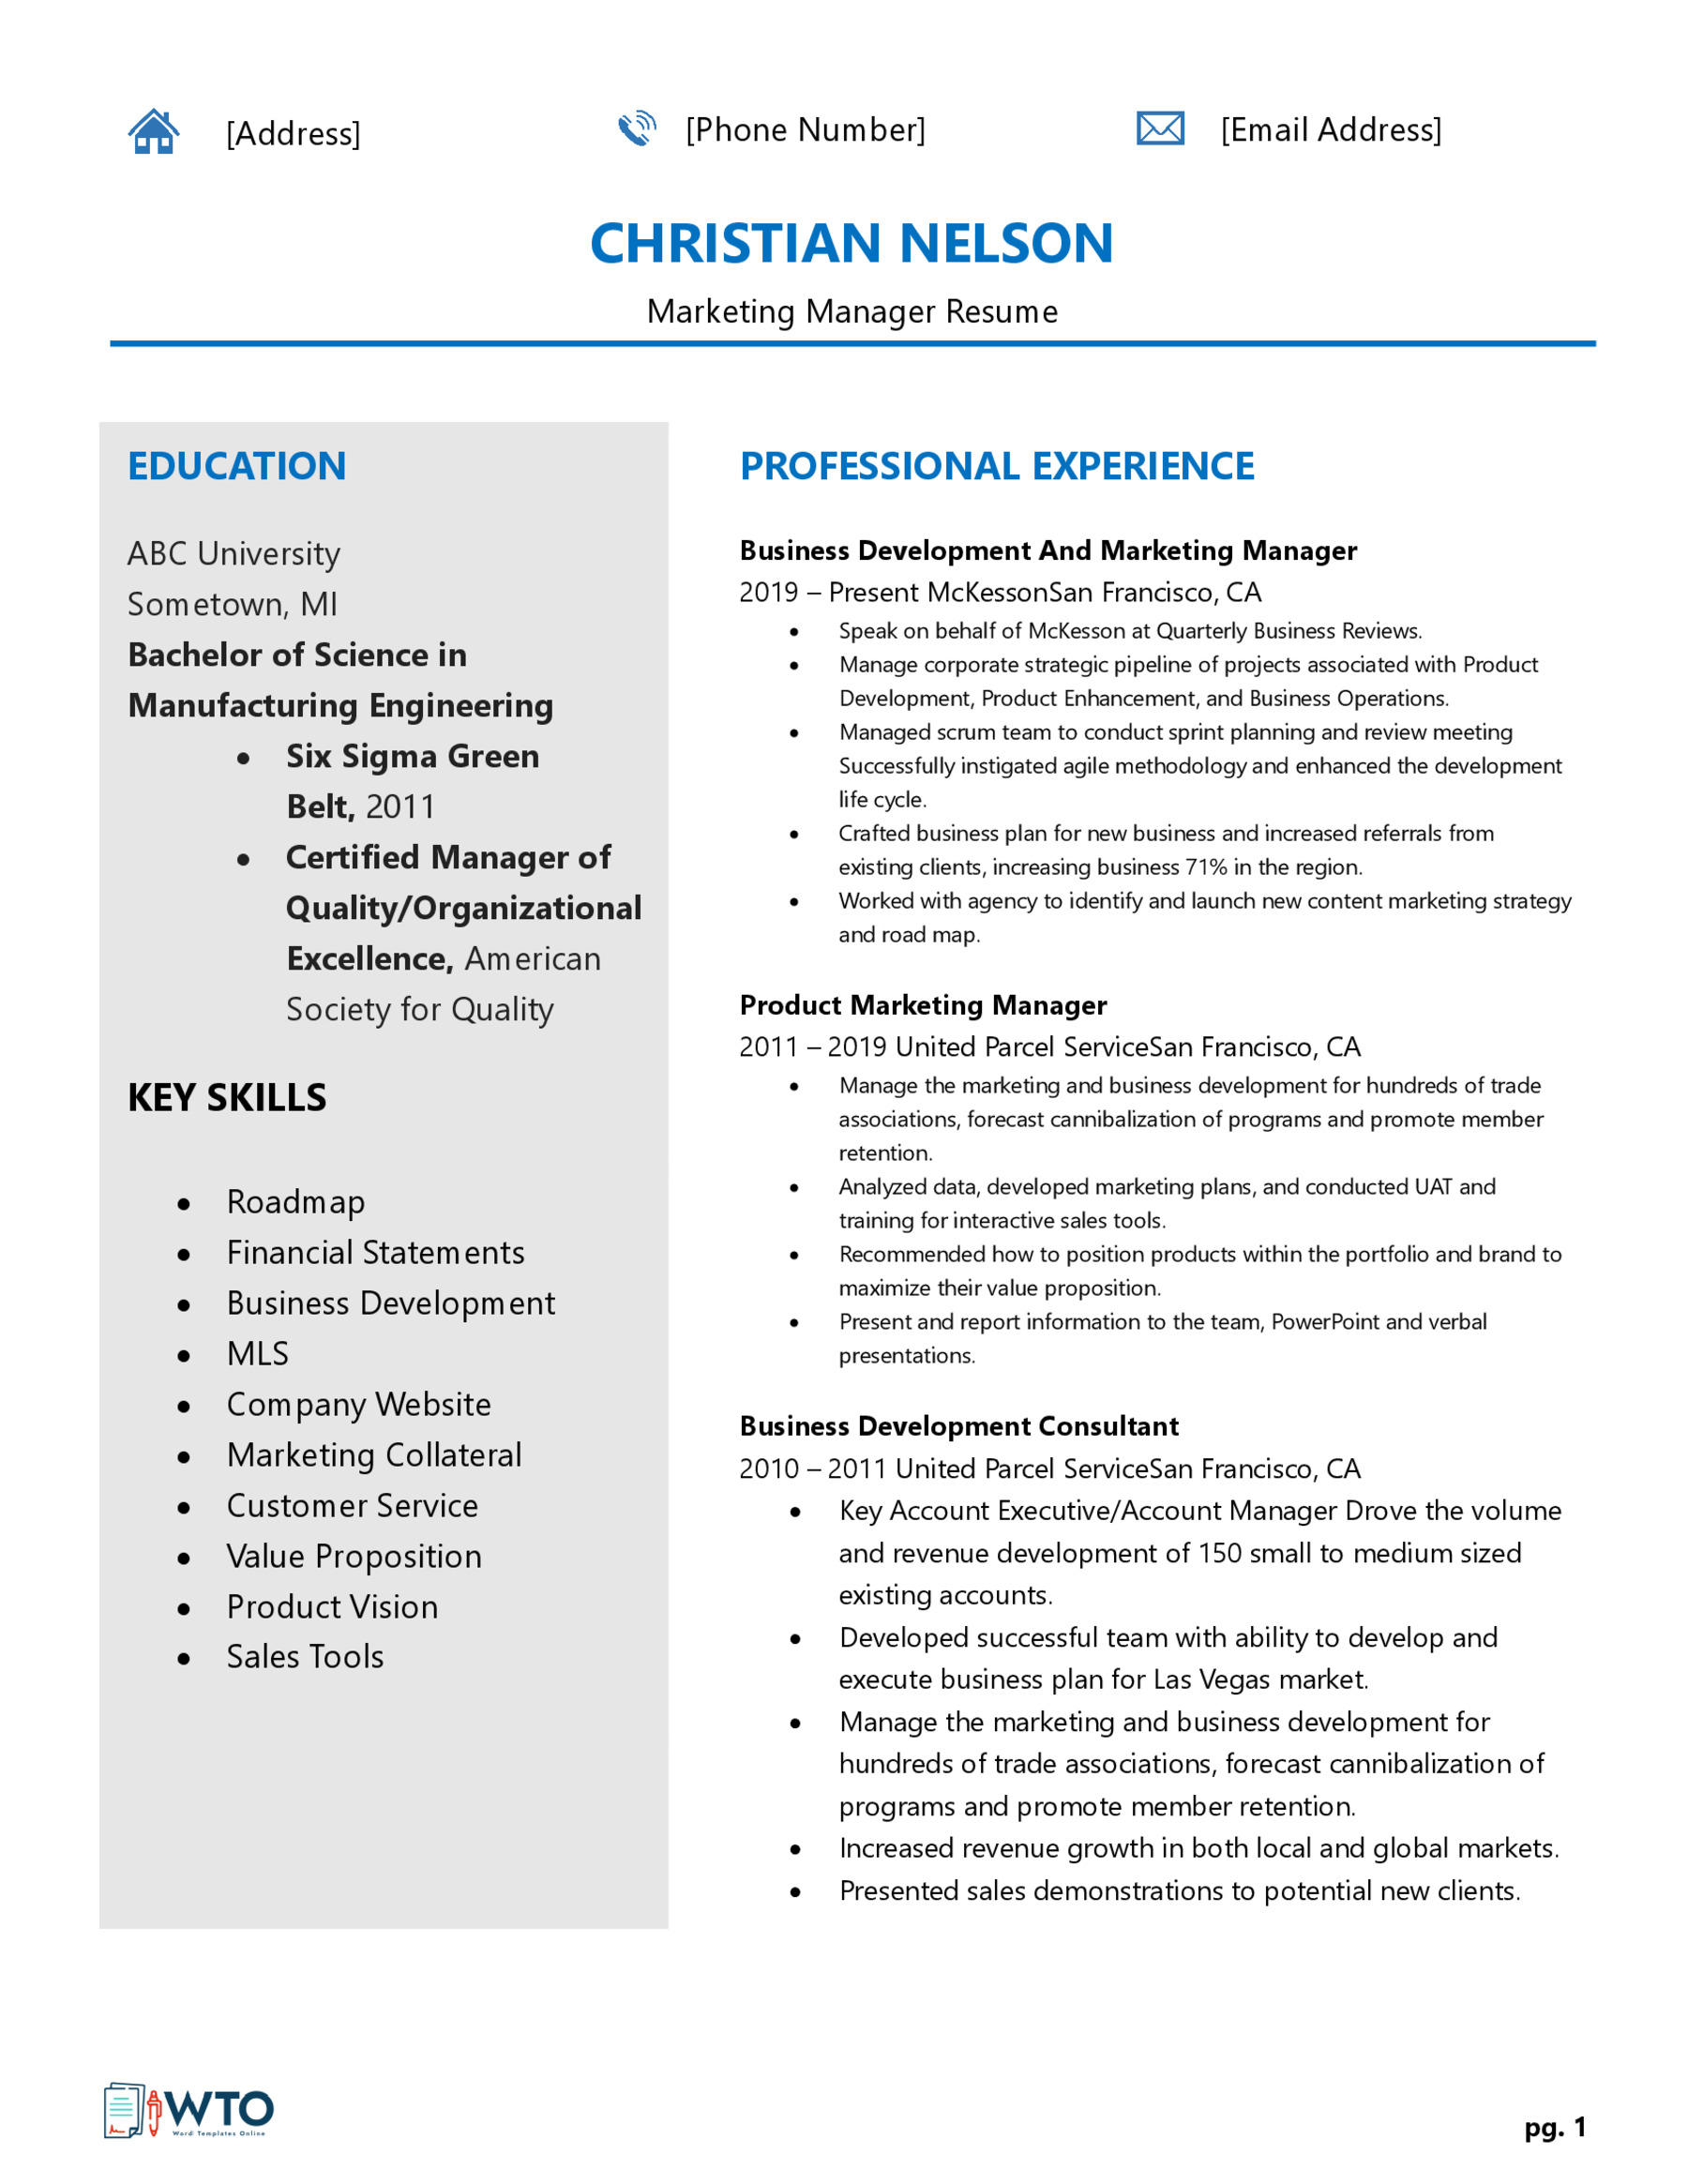 Marketing Manager Resume Template - Ready-to-Use Word Document